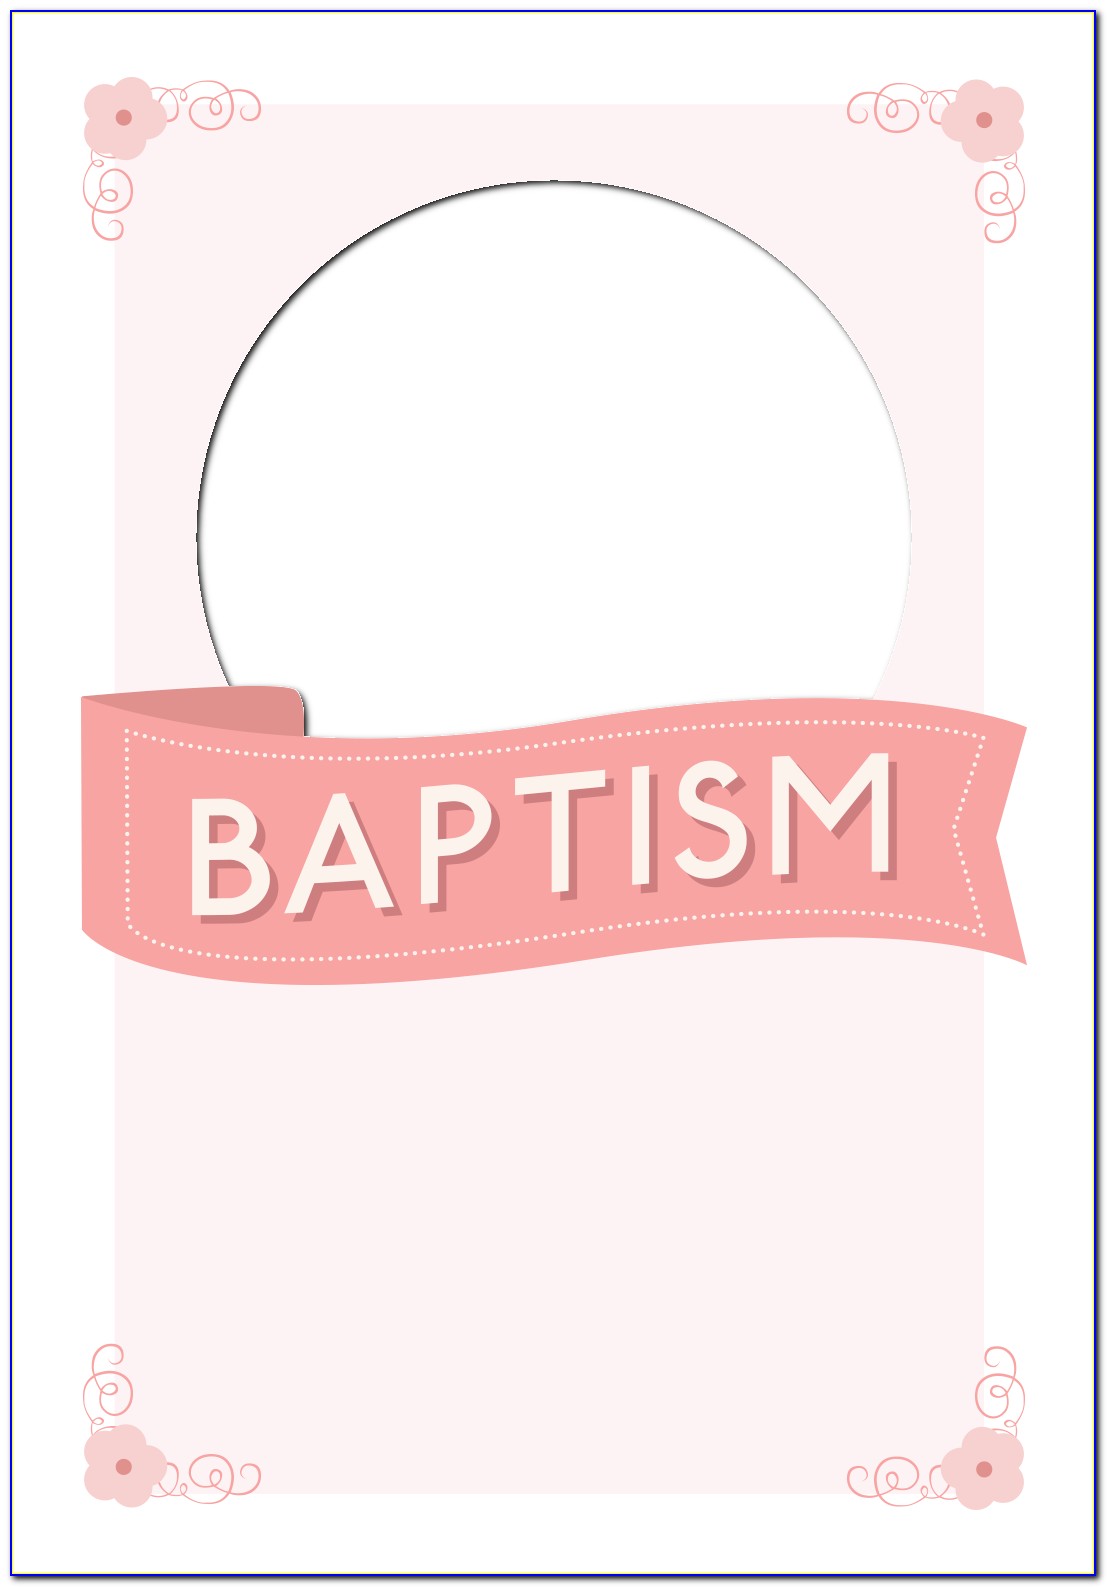 Christening Certificate Template Free